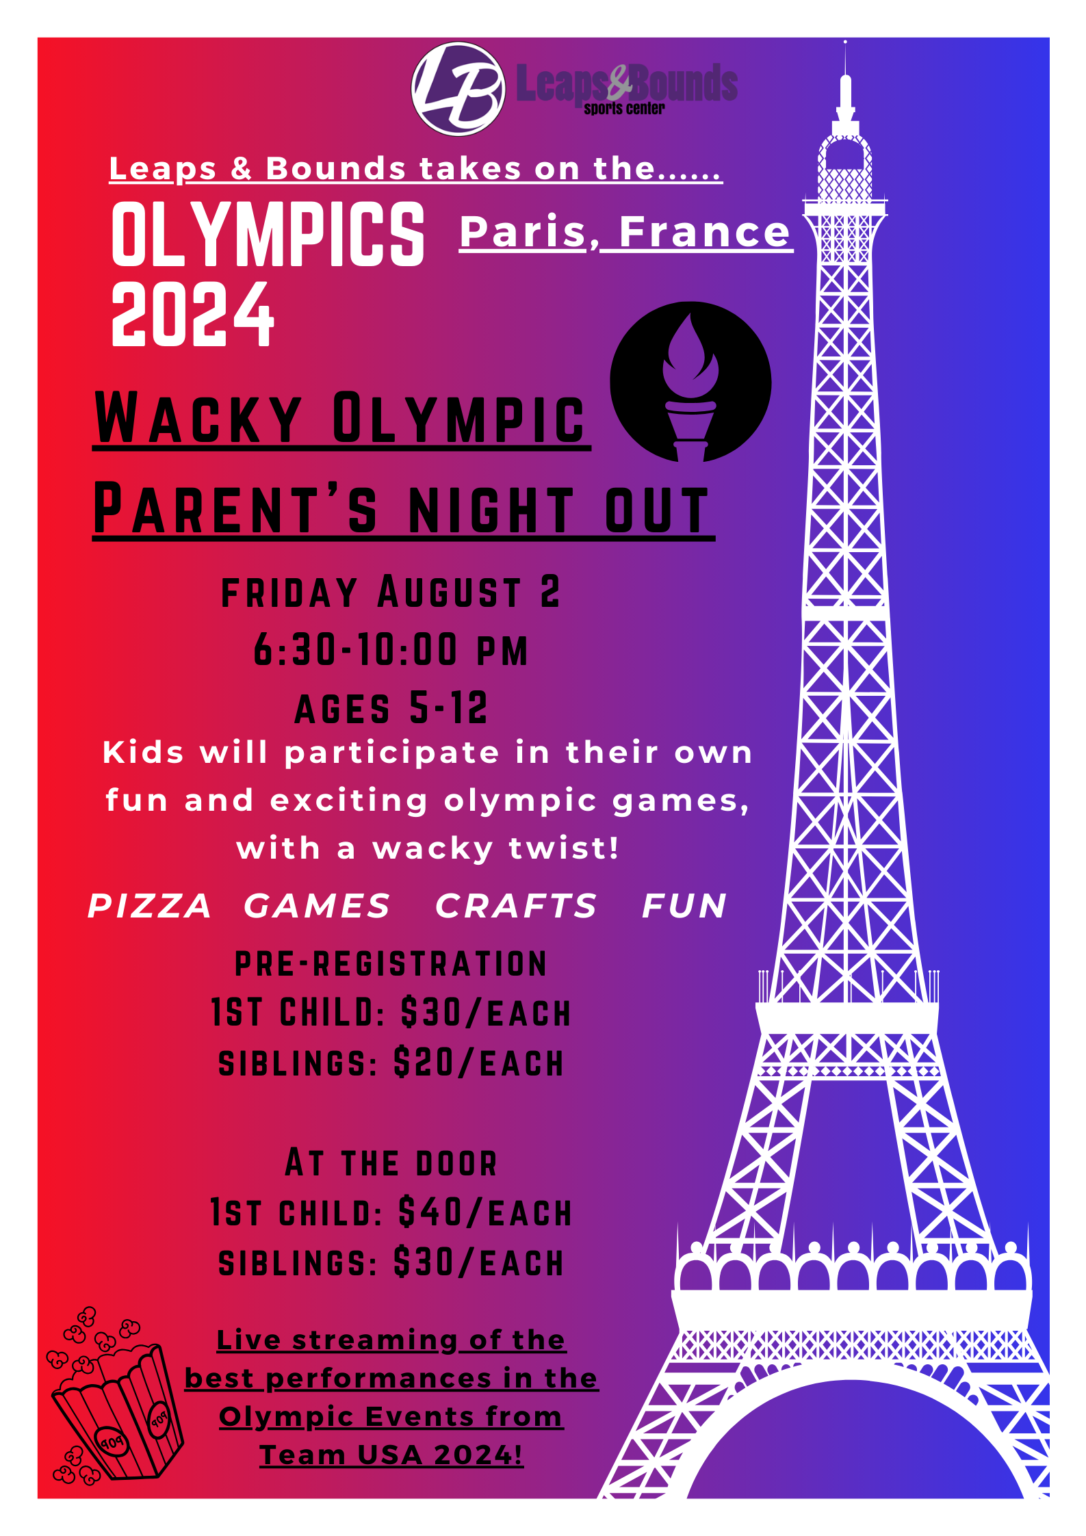 A colorful flyer for "Wacky Olympic Parent's Night Out" by Leaps & Bounds Sports Center in Paris, France on Friday, August 2, from 6:30-10:00 PM. It features a torch, kids' games, crafts, pizza, and pricing details. Ages 5-12. Pre-registration and at-door prices listed.